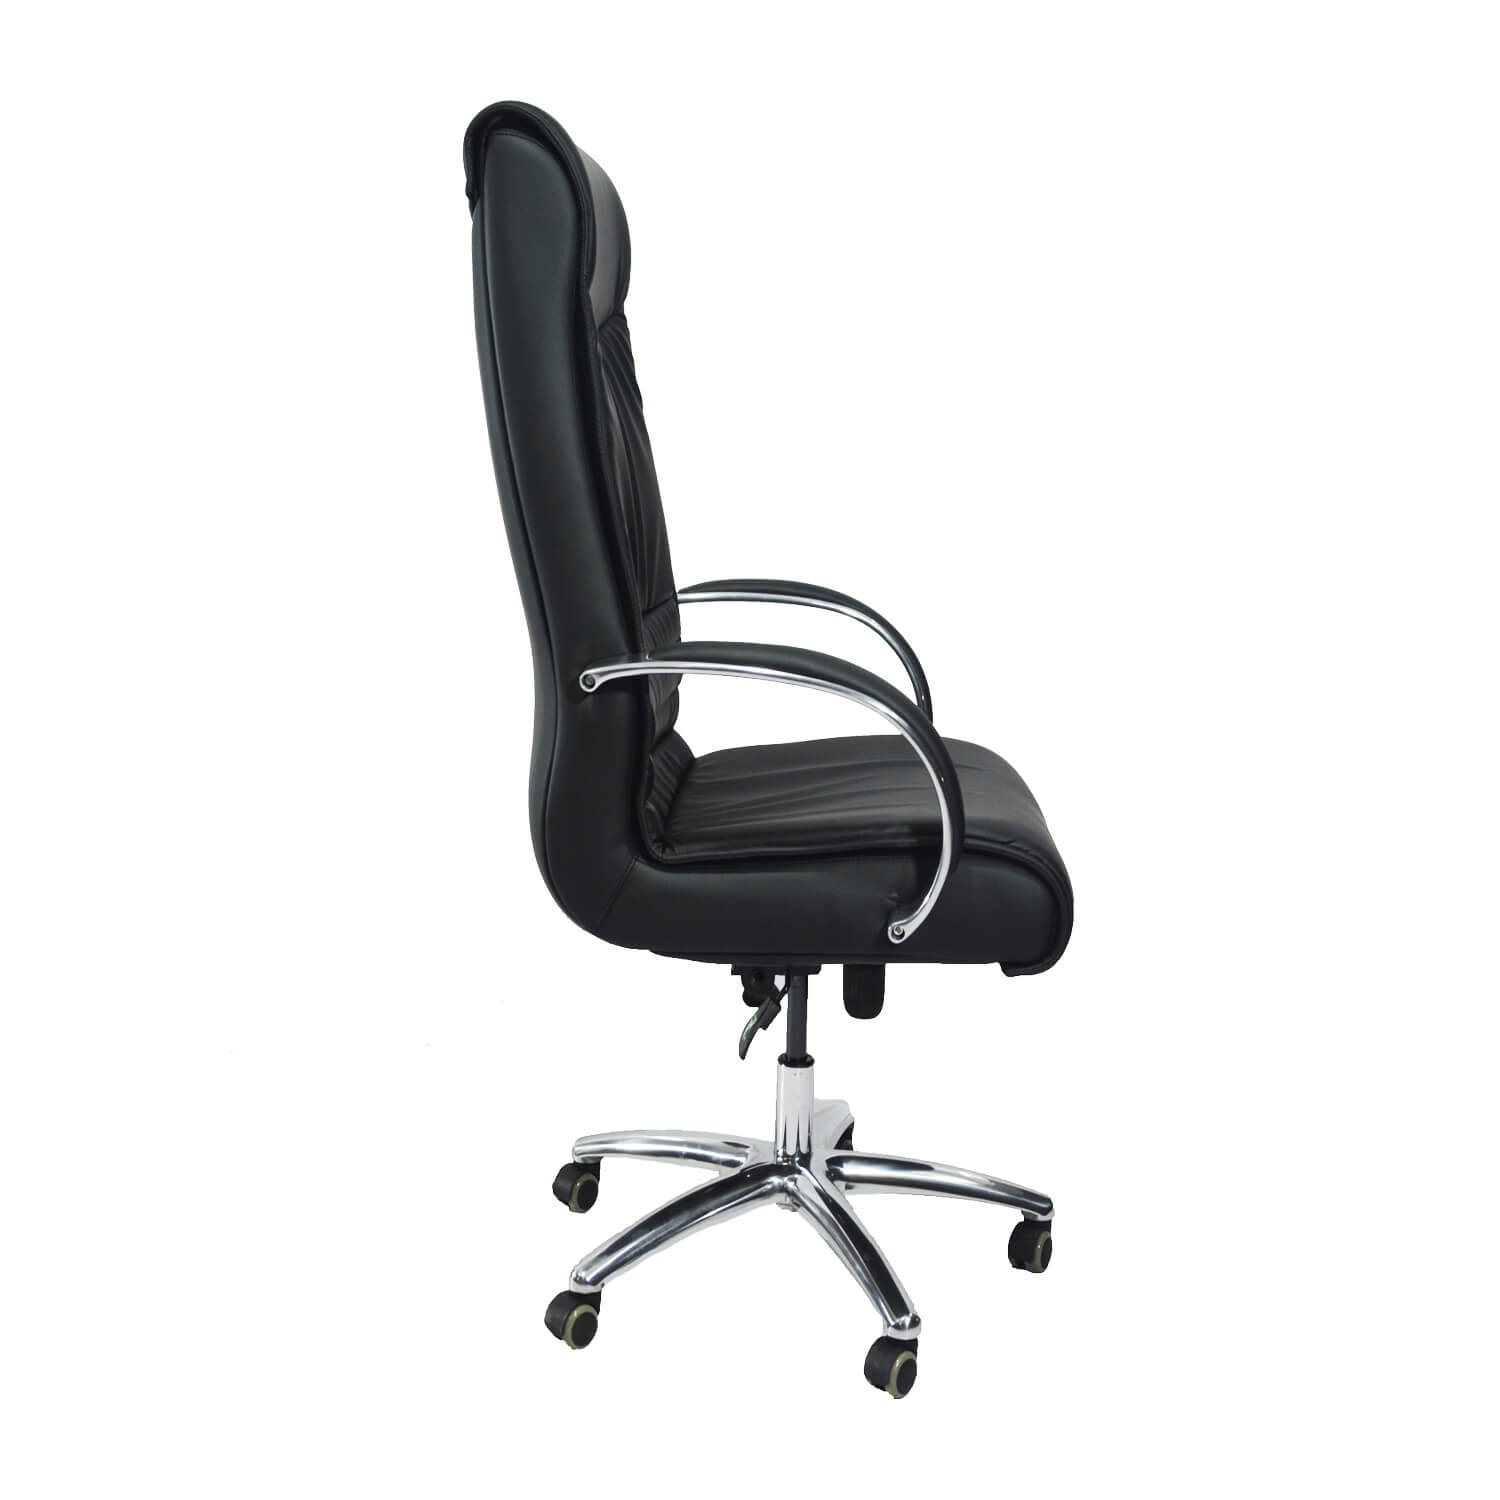 PROFURN EBY A801 HB Office Chair